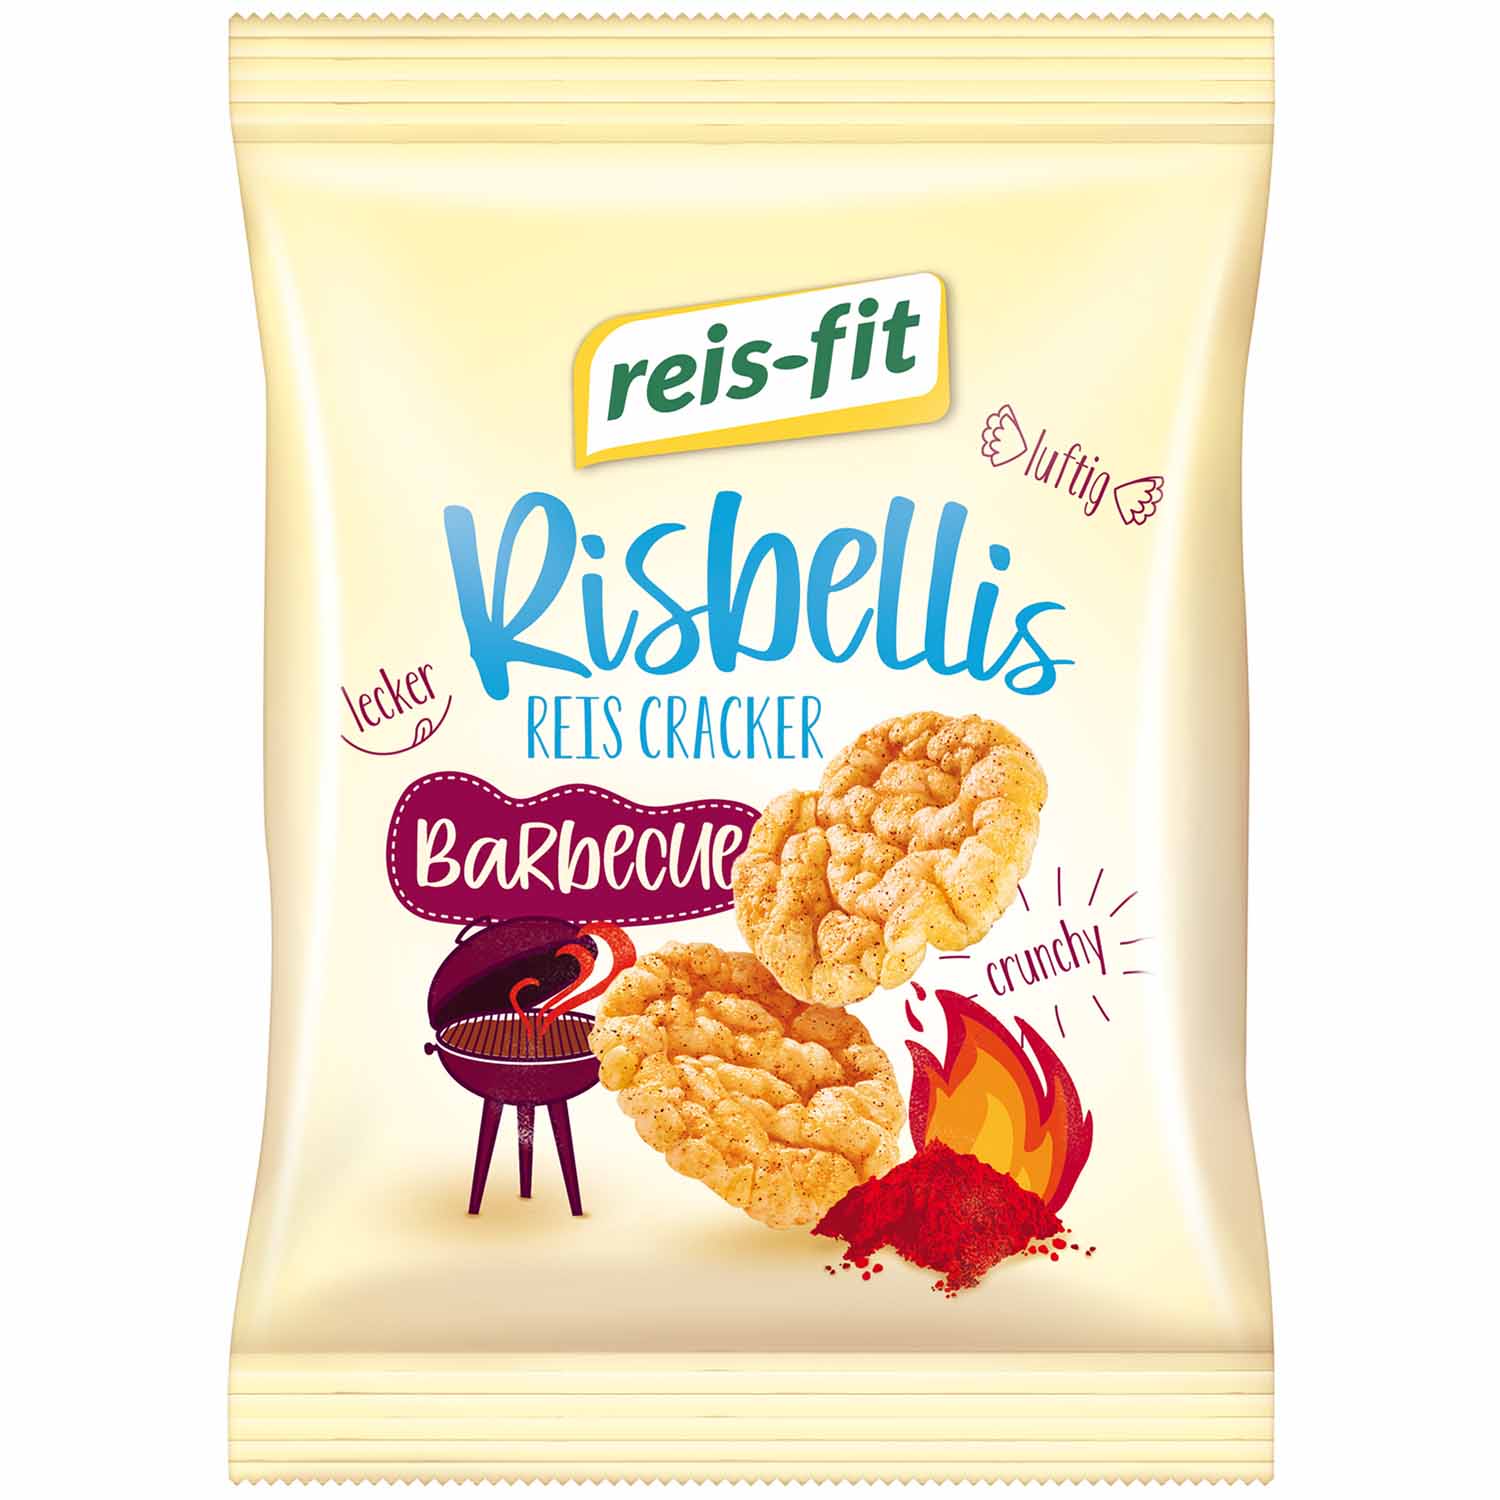 Risbellis | Sweets reis-fit Shop 40g of World Barbecue kaufen im Online